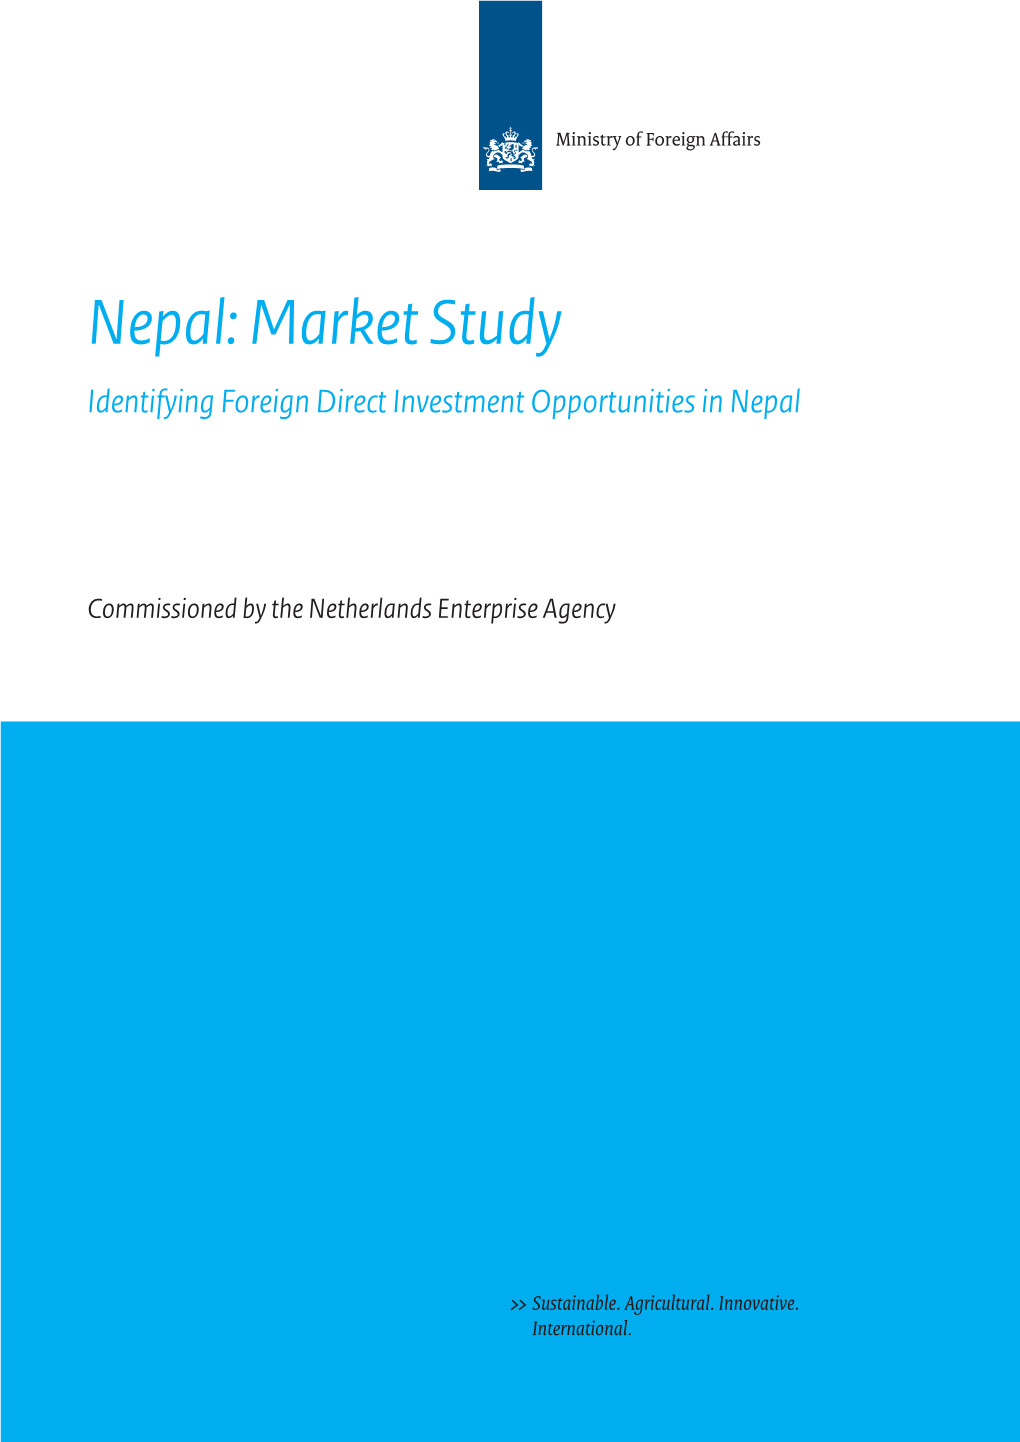 Nepal: Market Study Identifying Foreign Direct Investment Opportunities in Nepal